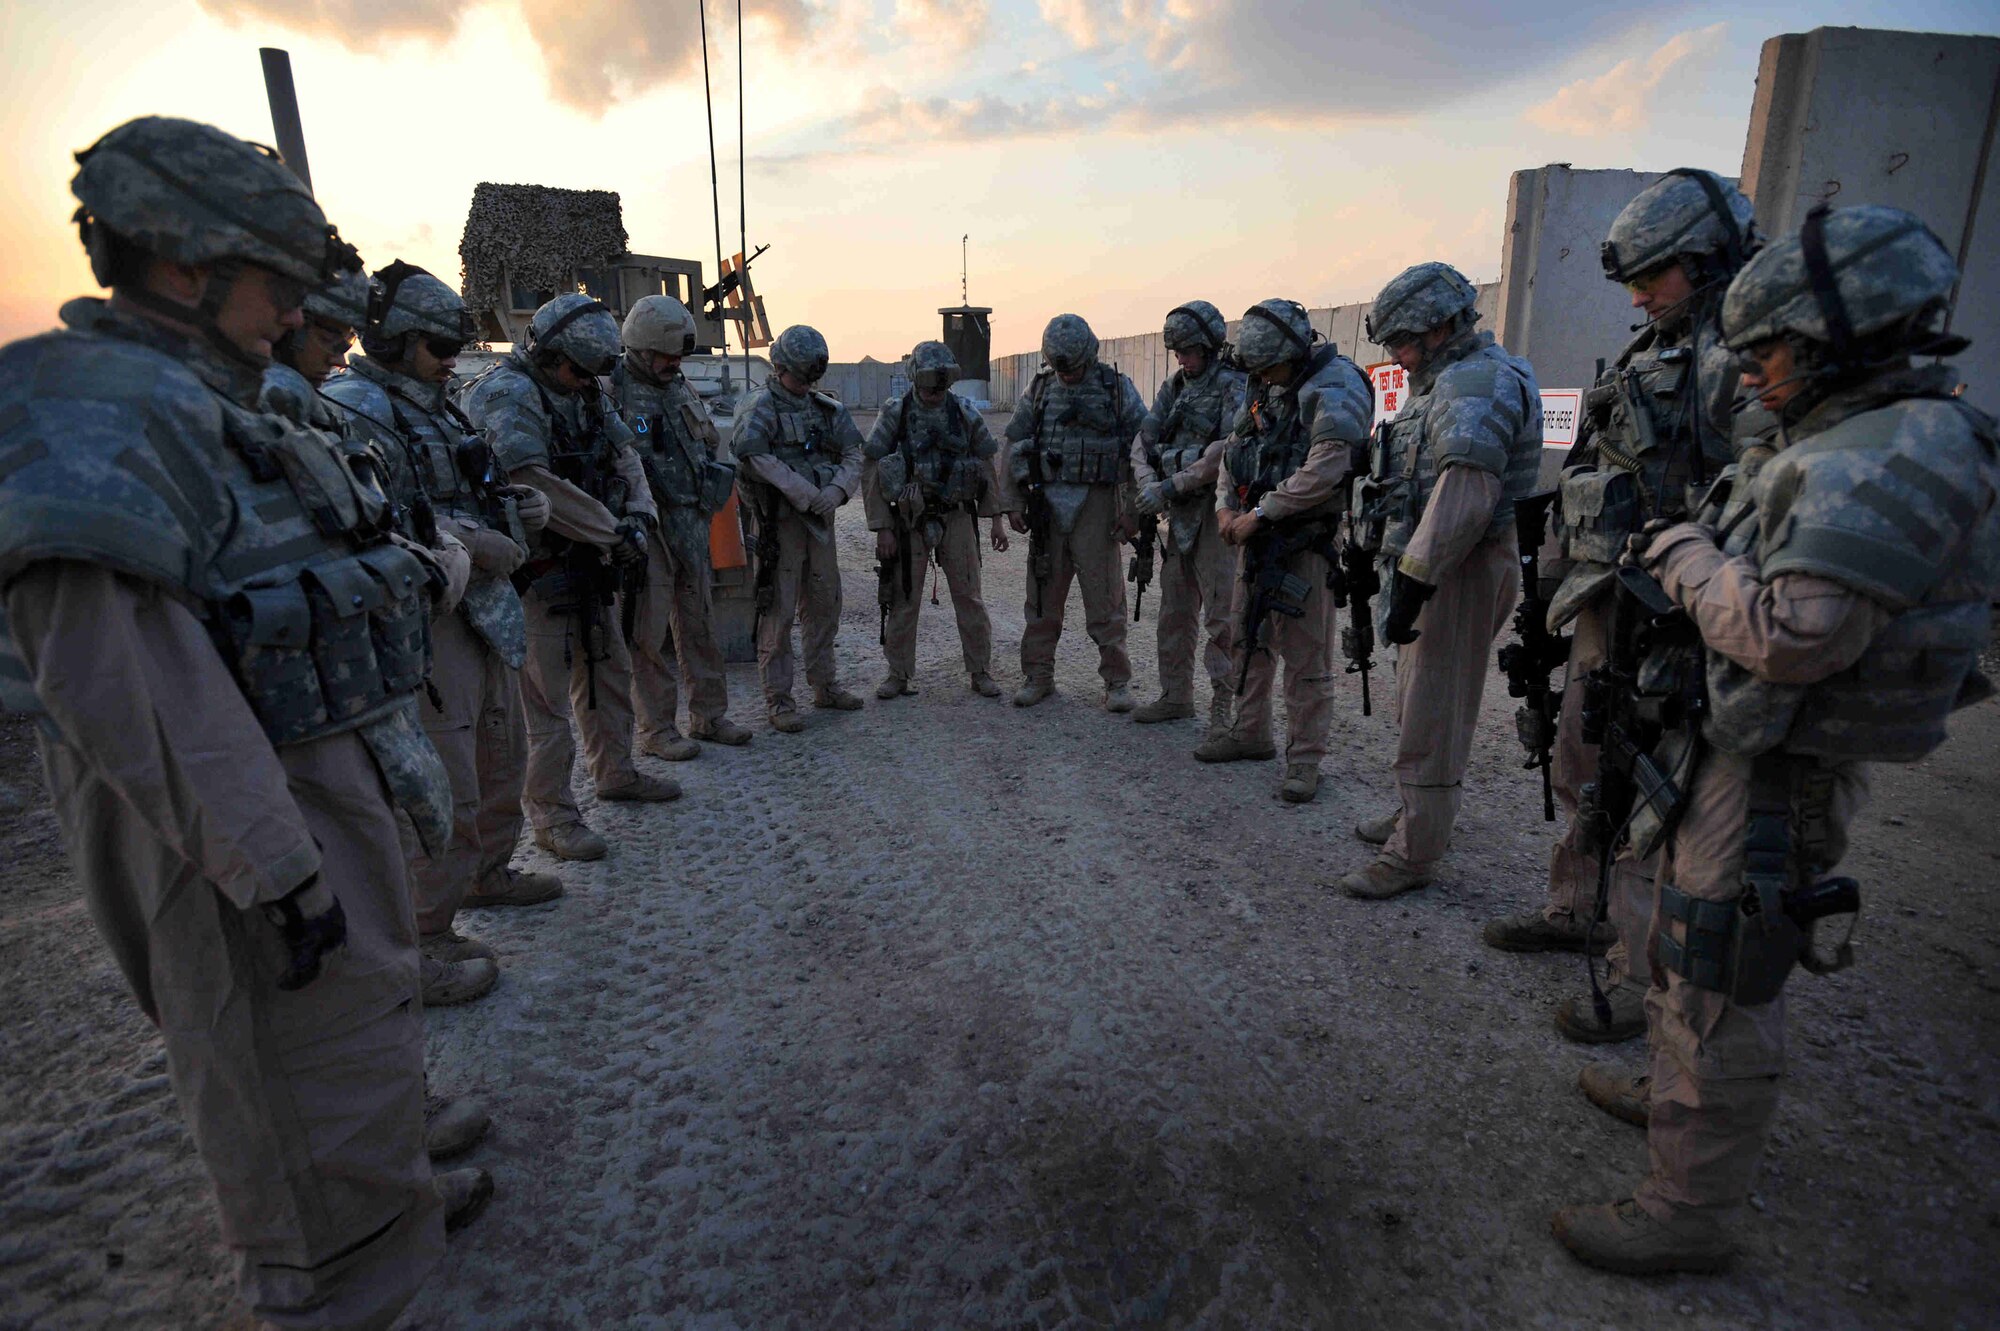 Airmen assigned to Detachment 3, 732nd Expeditionary Security Forces Squadron, group together for a prayer, a tradition, prior to every mission outside the wire Nov. 4, 2008, at Forward Operations Base, Falcon located in southern Baghdad, Iraq. (U.S. Navy photo by Petty Officer 2nd Class Todd Frantom)